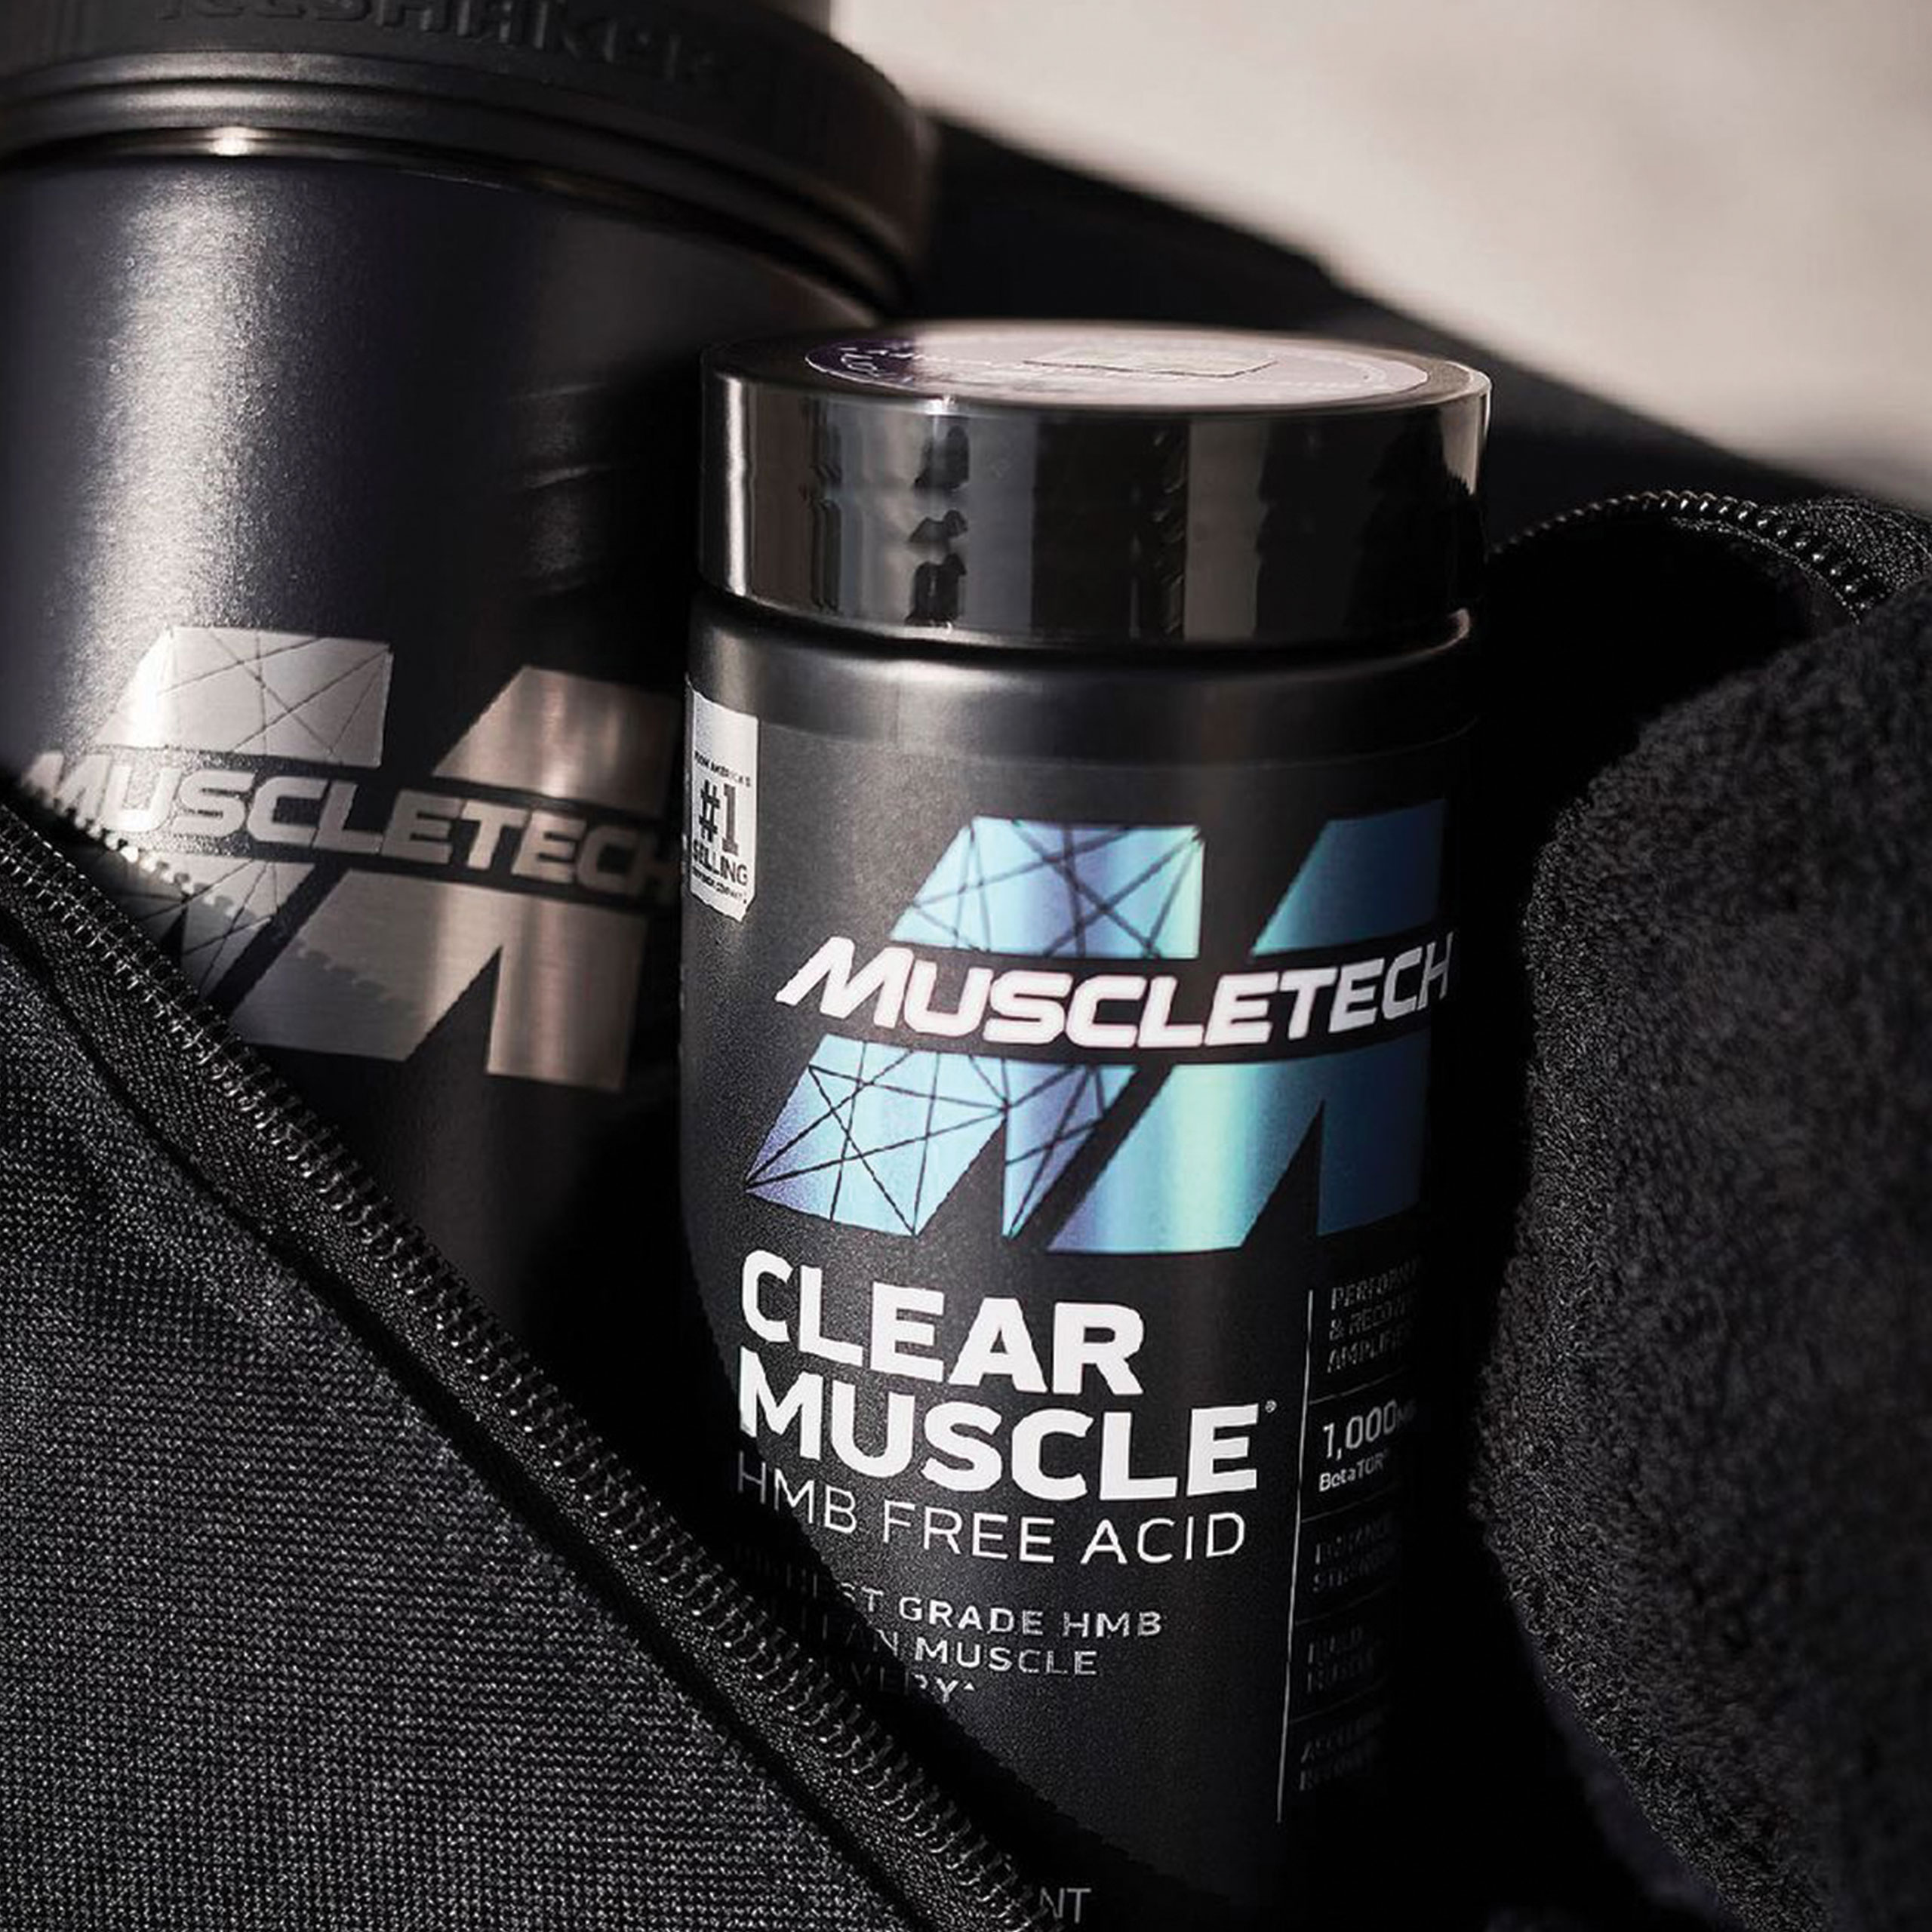 Supplement product MuscleTech Clear Muscle featuring the clincally proven muscle health ingredient myHMB Clear (hmb free acid)